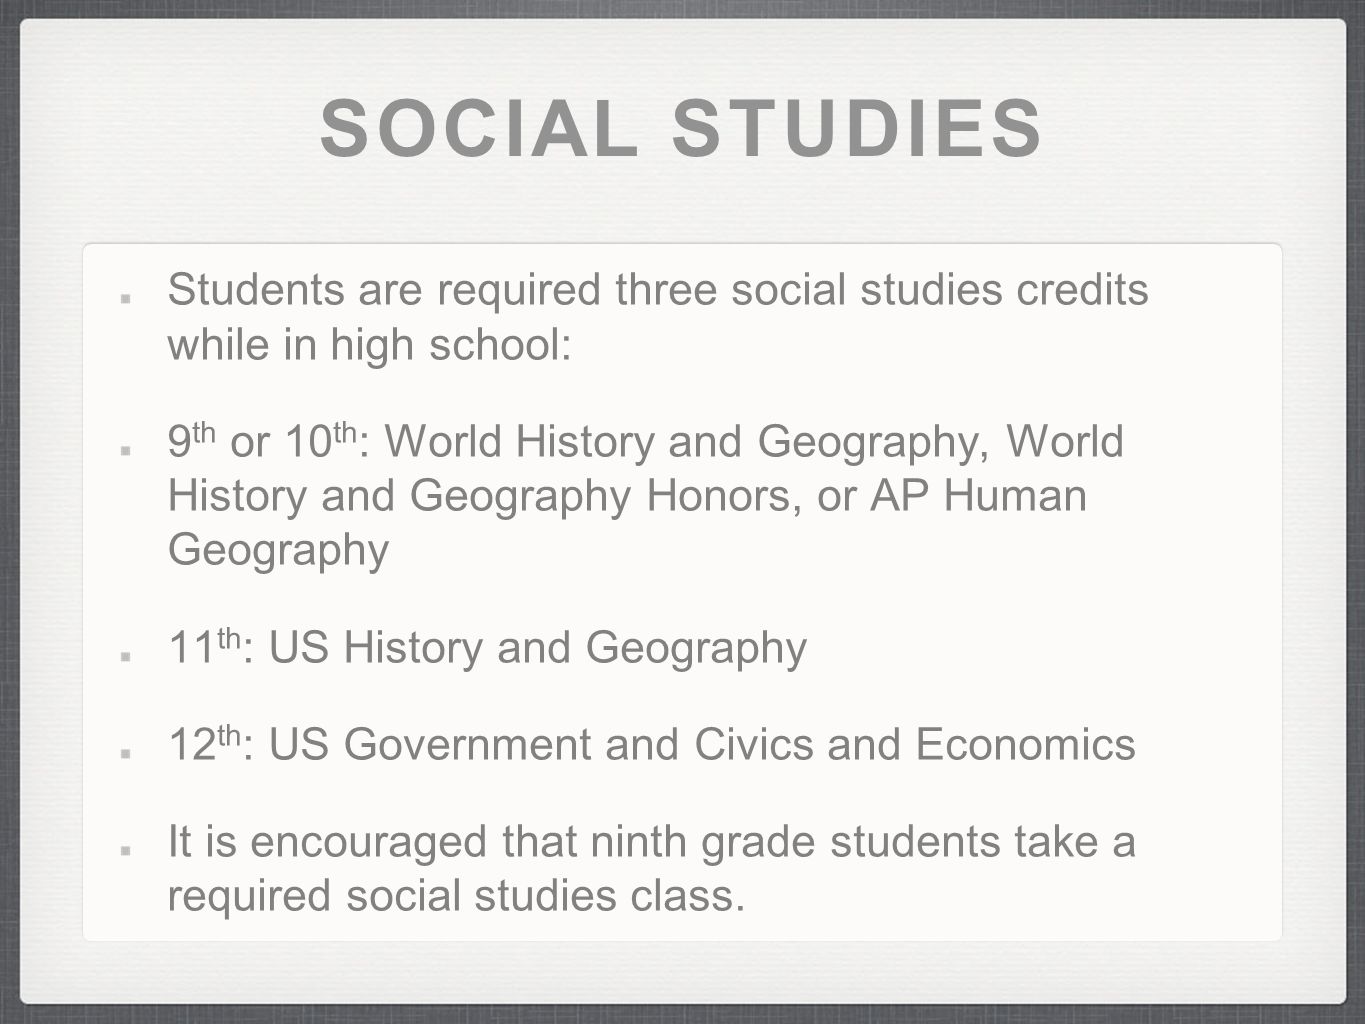 SOCIAL STUDIES Students are required three social studies credits while in high school: 9 th or 10 th : World History and Geography, World History and Geography Honors, or AP Human Geography 11 th : US History and Geography 12 th : US Government and Civics and Economics It is encouraged that ninth grade students take a required social studies class.